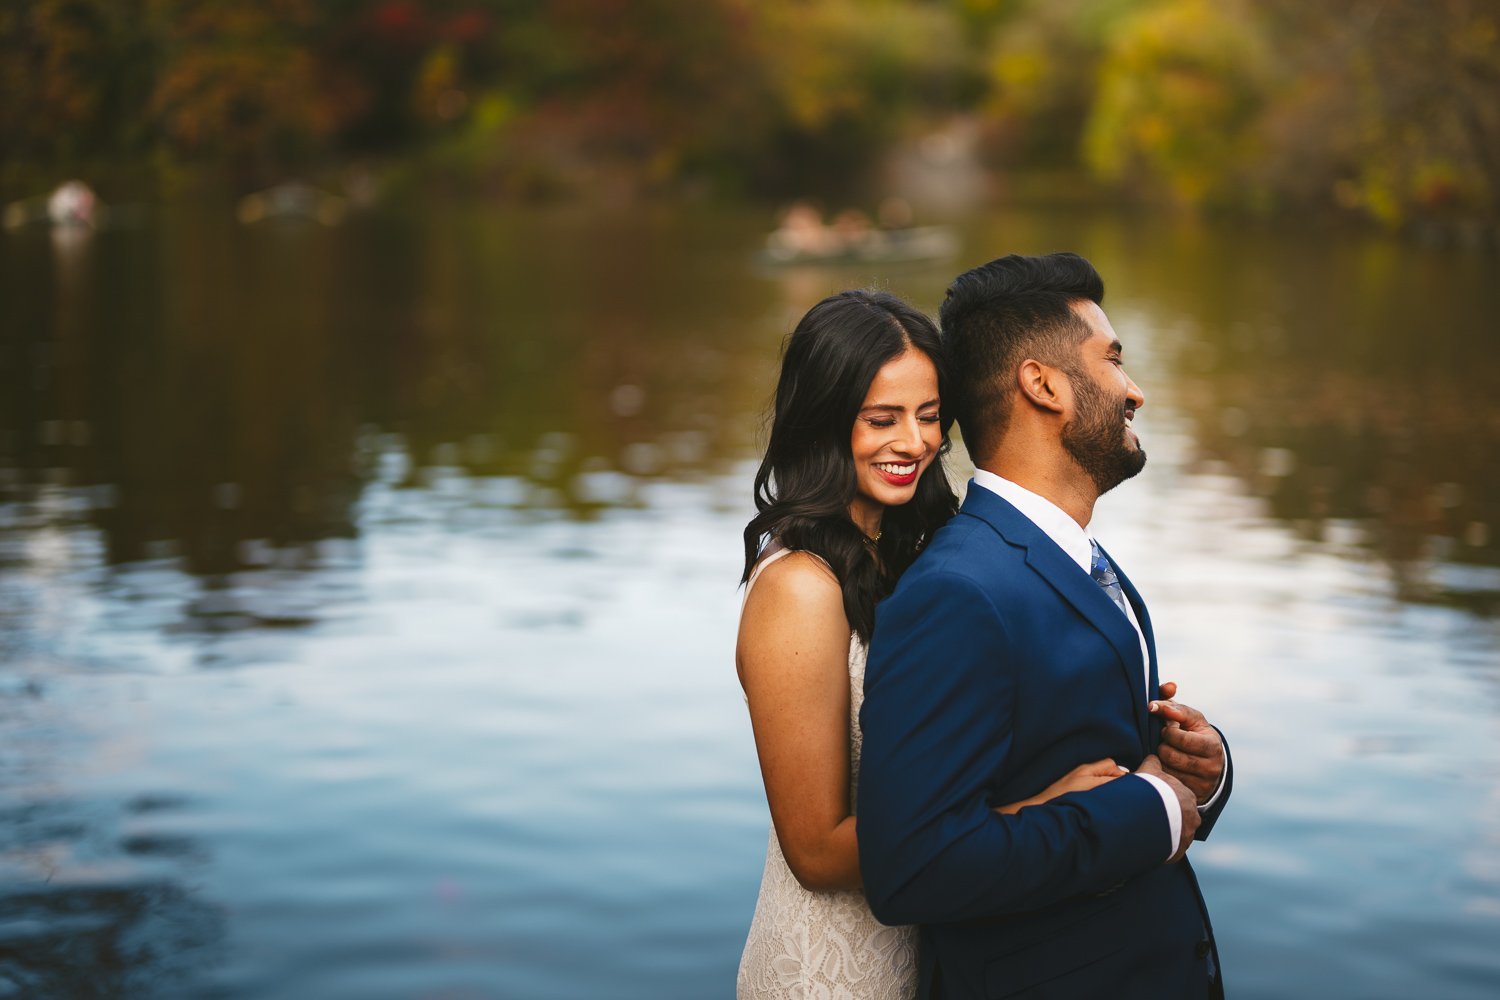  Creative engagement and wedding photography in Central Park, New York. 